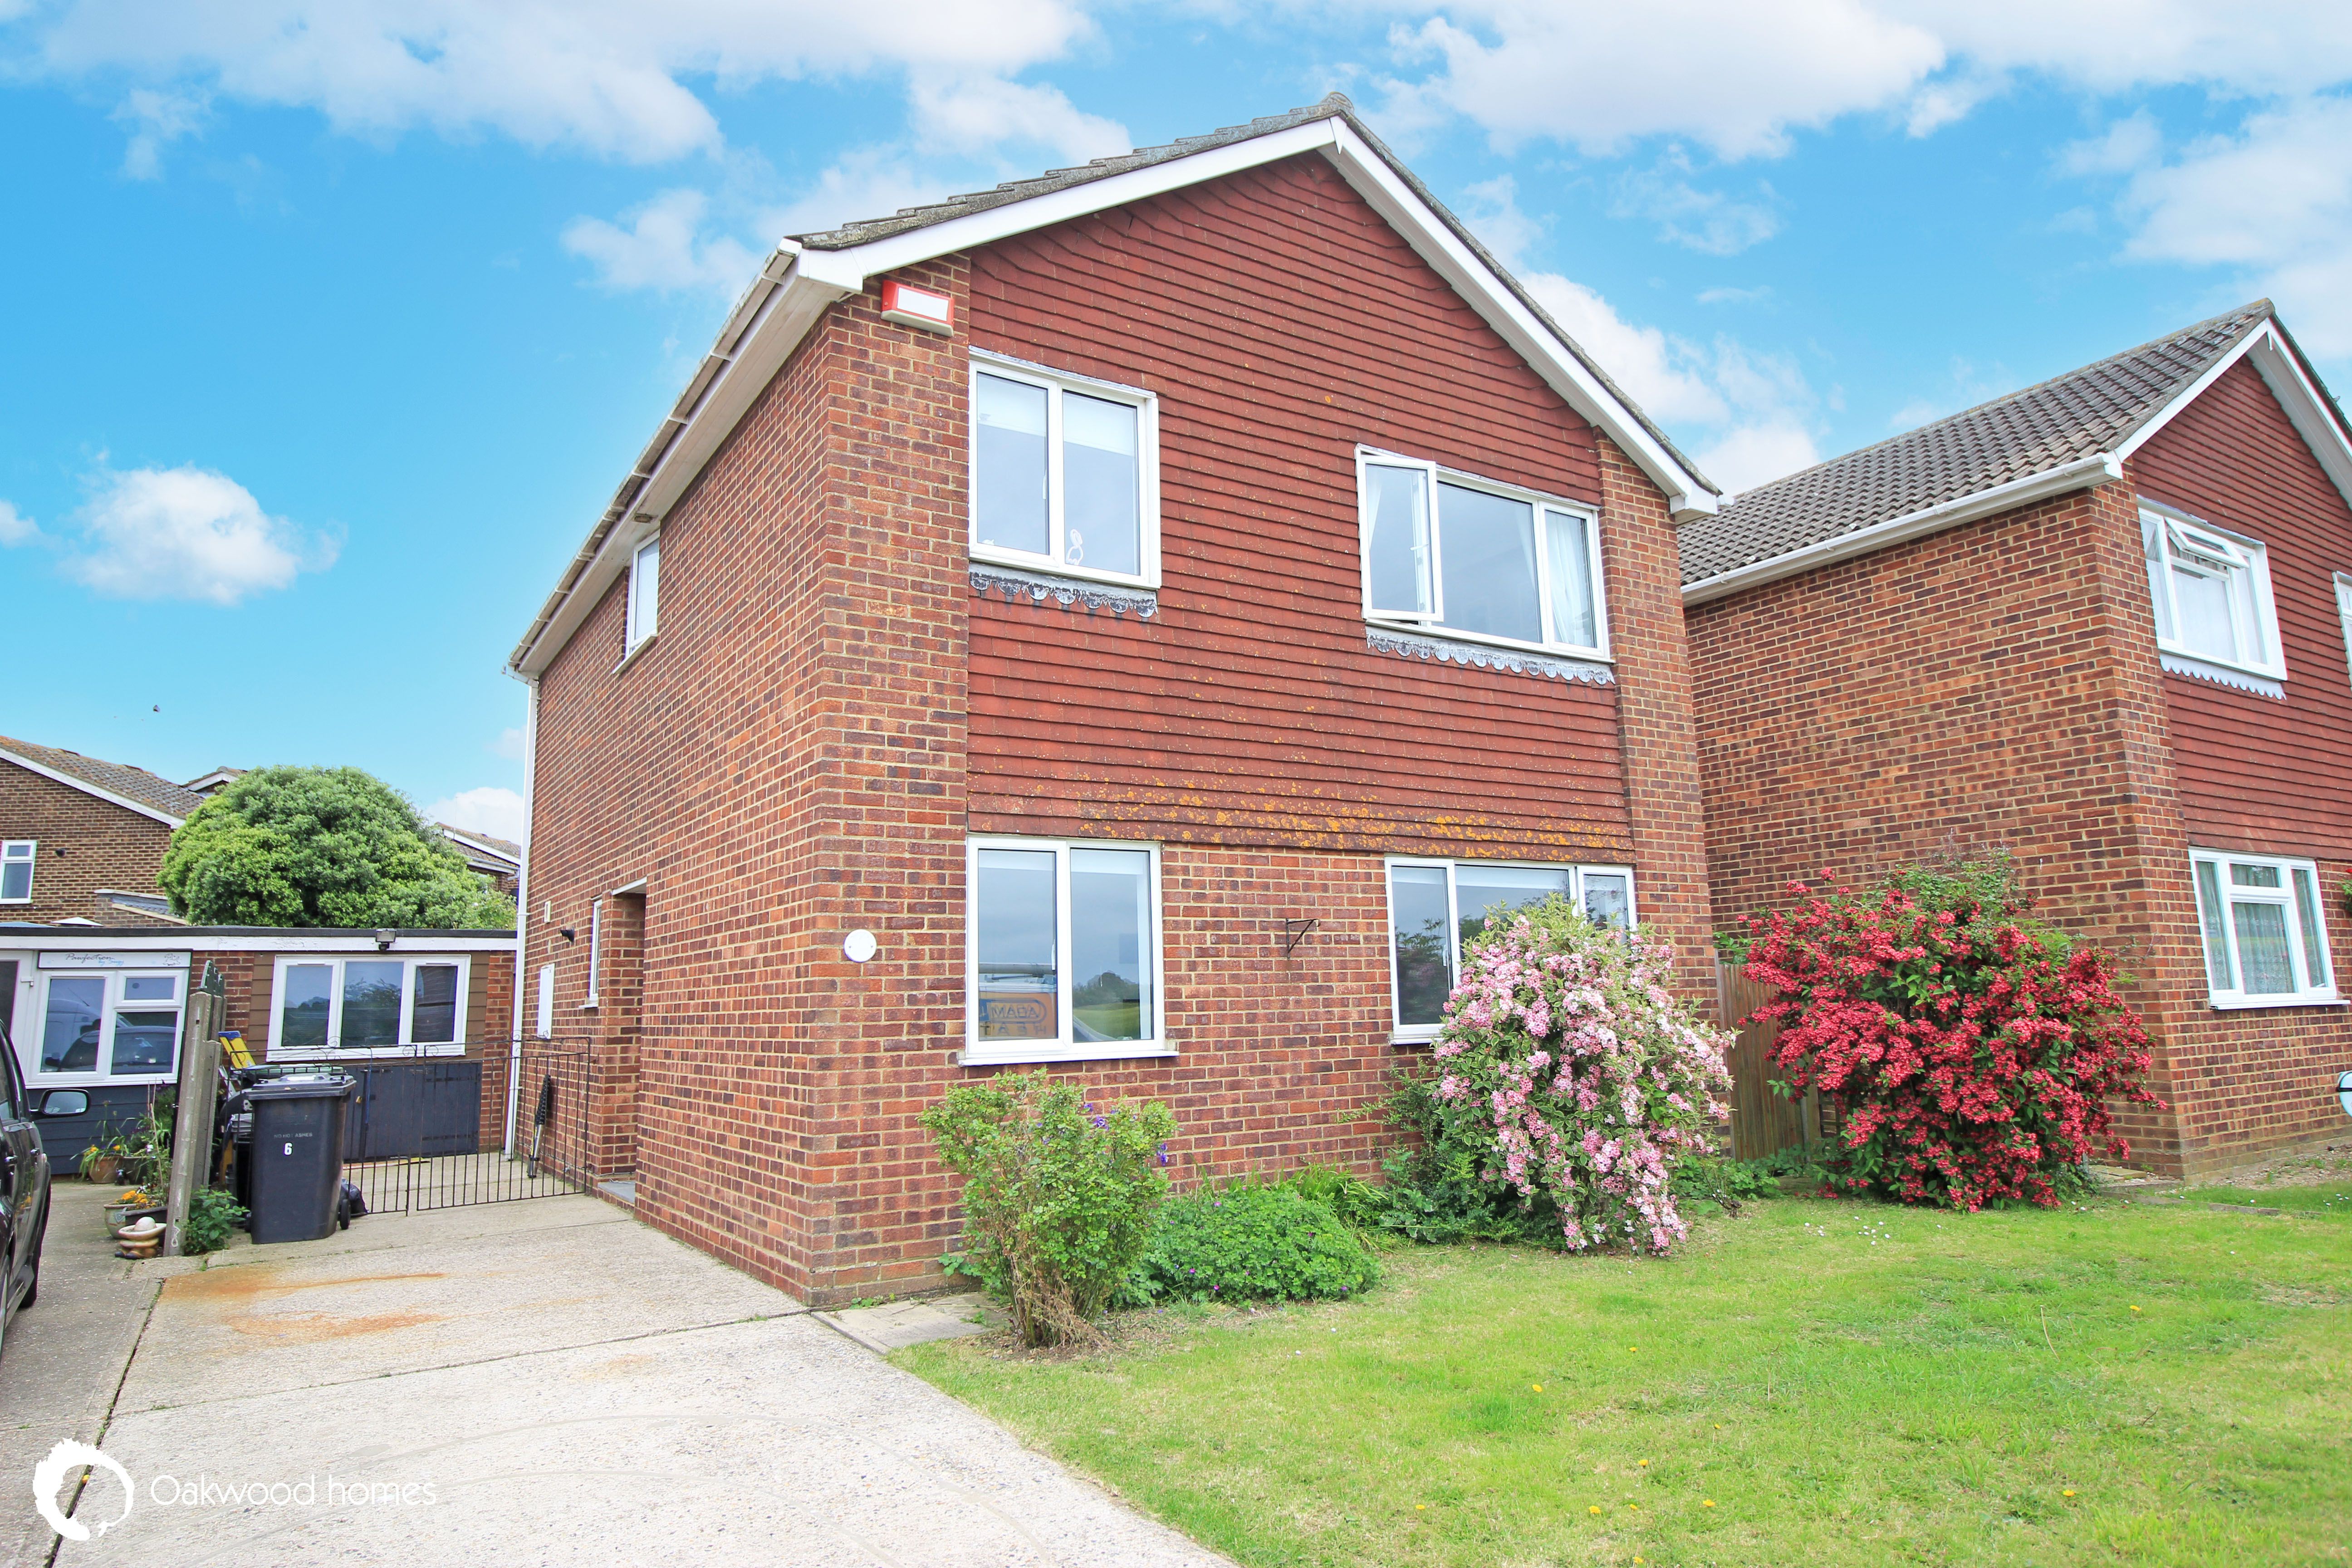 4 bed detached house for sale in Thornden Close, Herne Bay - Property Image 1